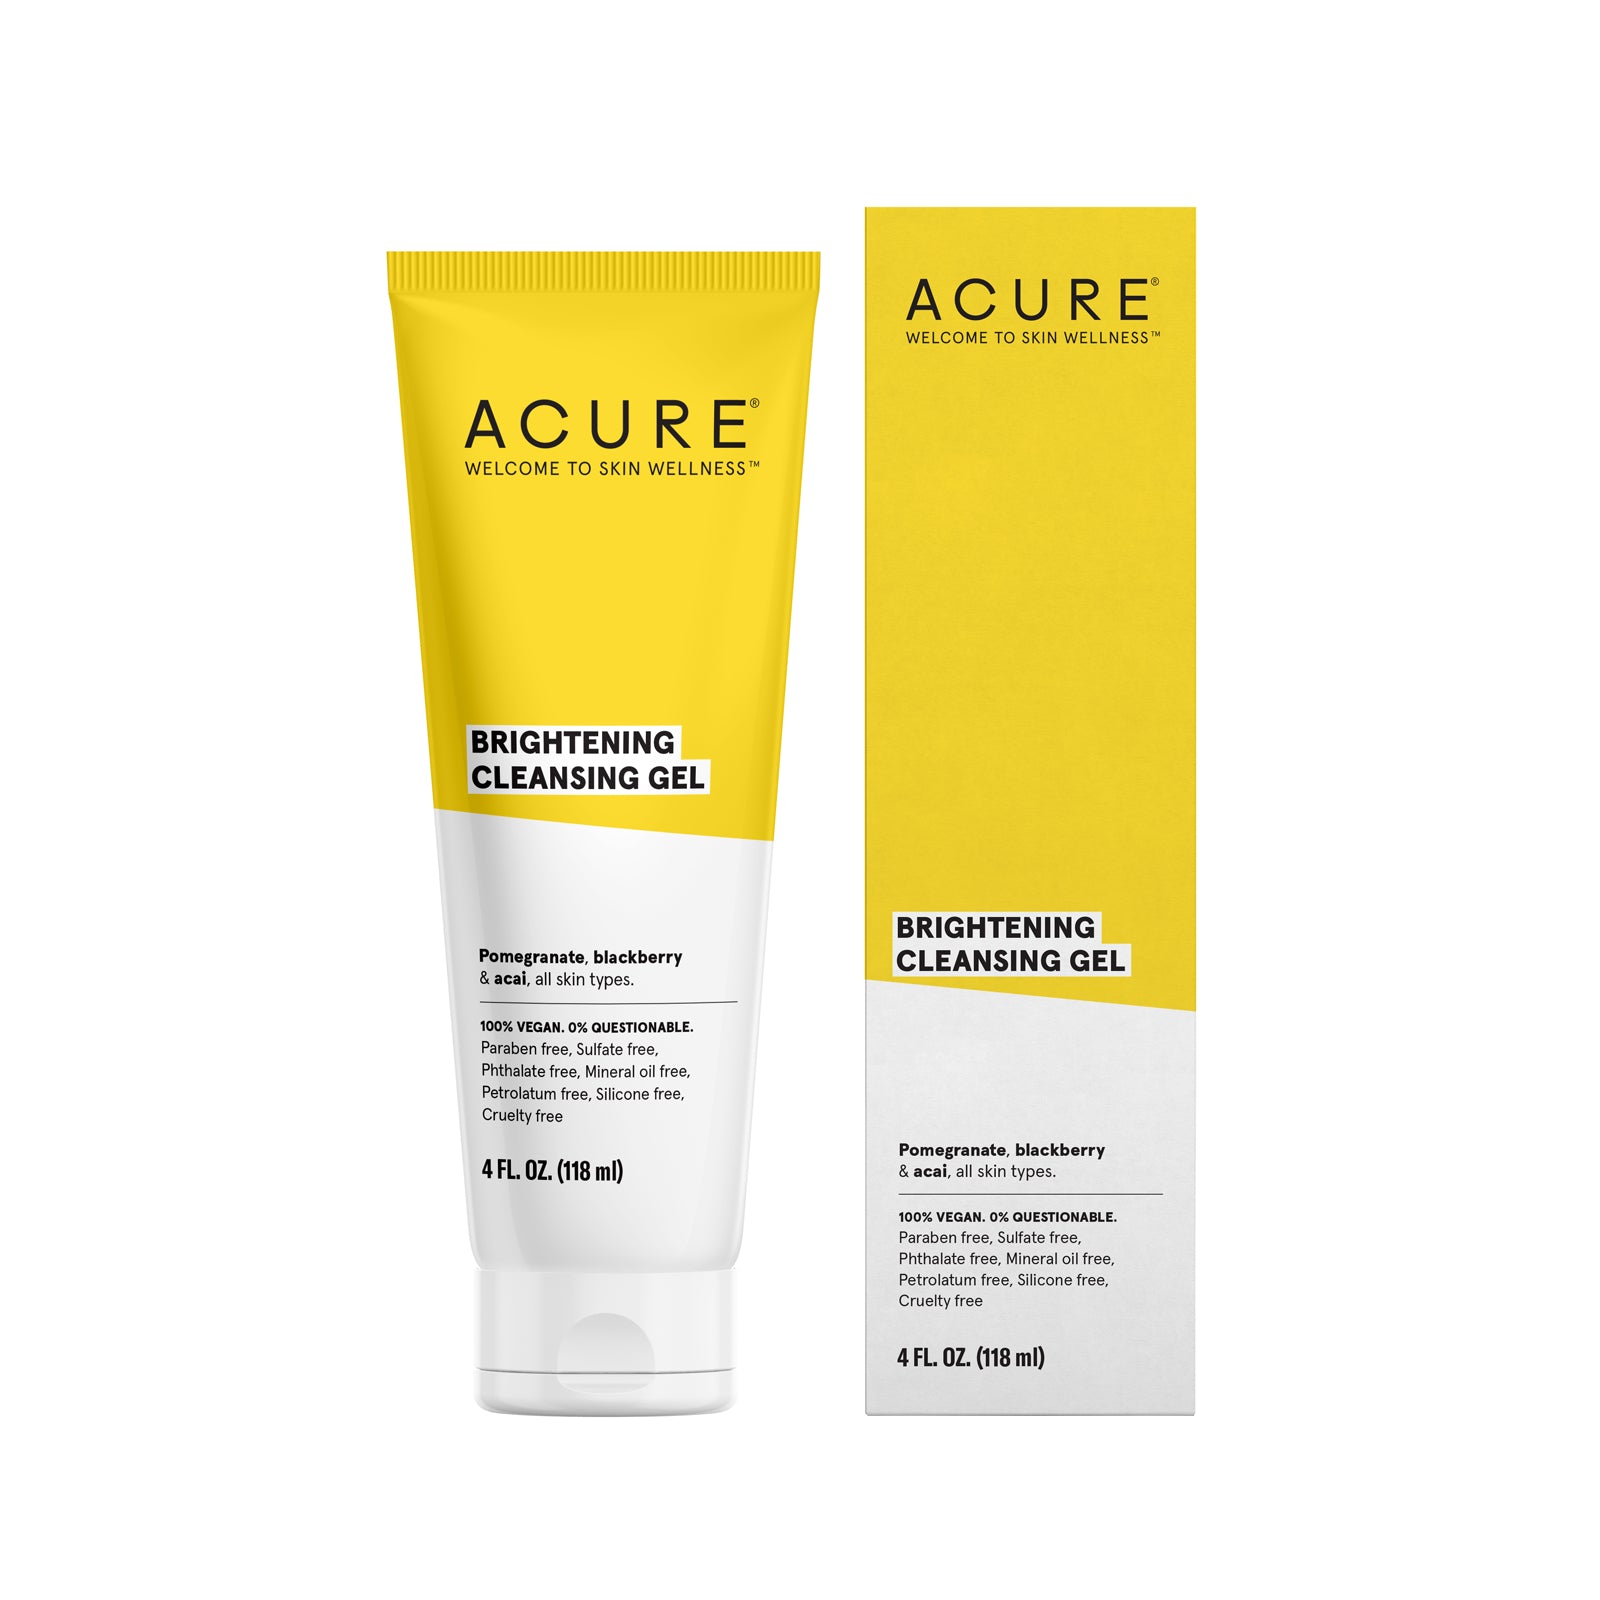 Acure Brilliantly Brightening Cleansing Gel  (118ml) - Lifestyle Markets